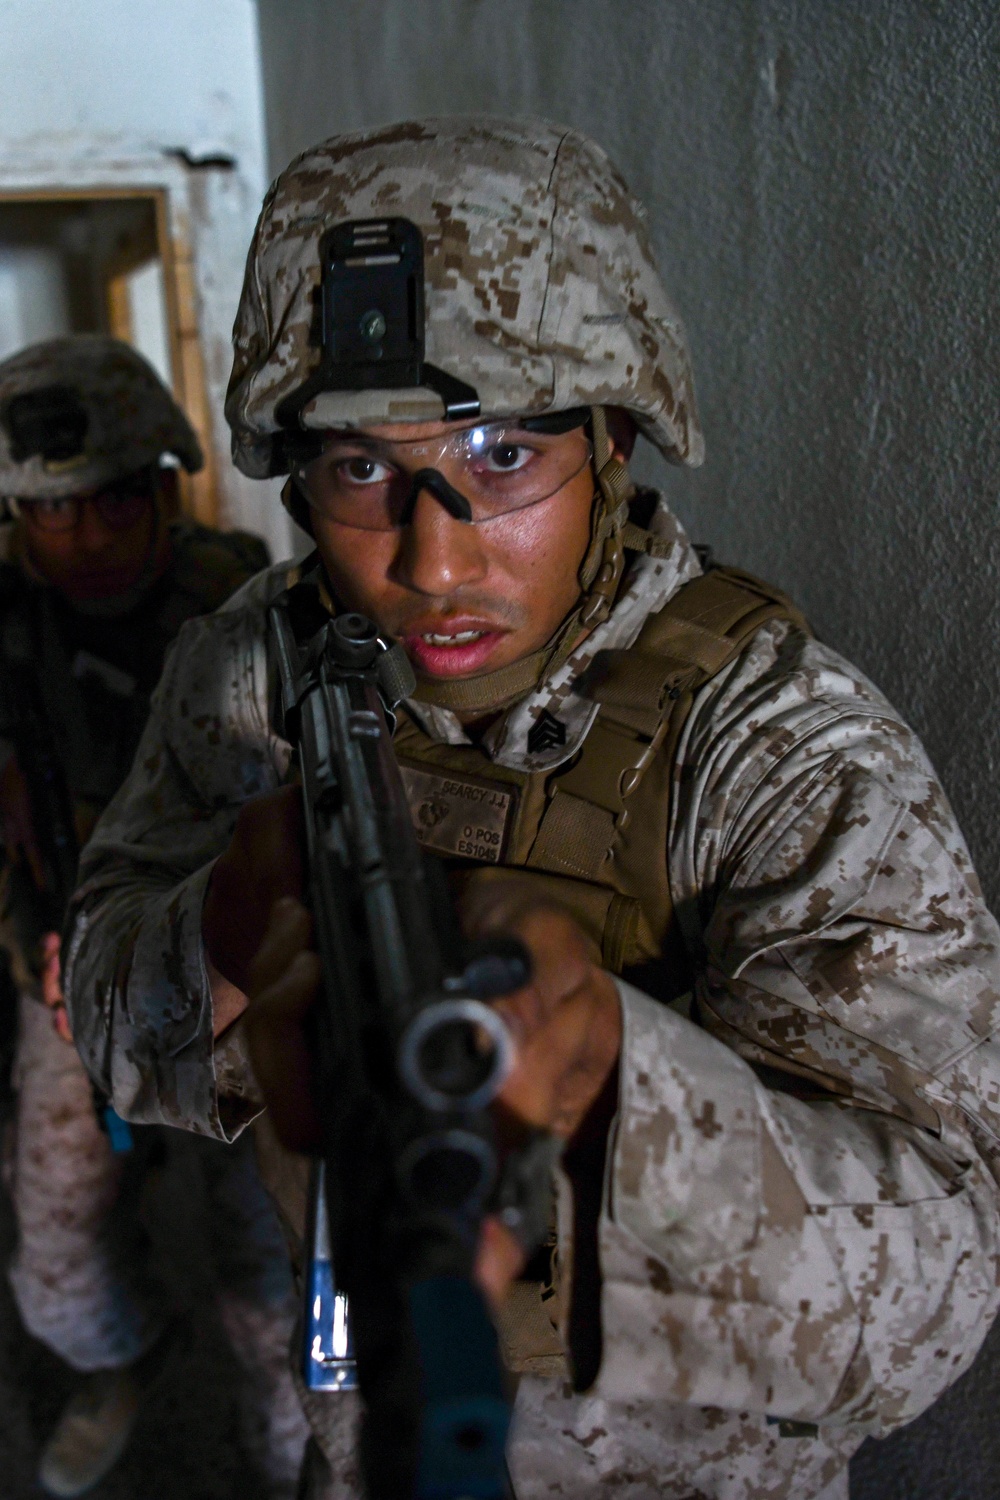 Marines Joint Training with GEO